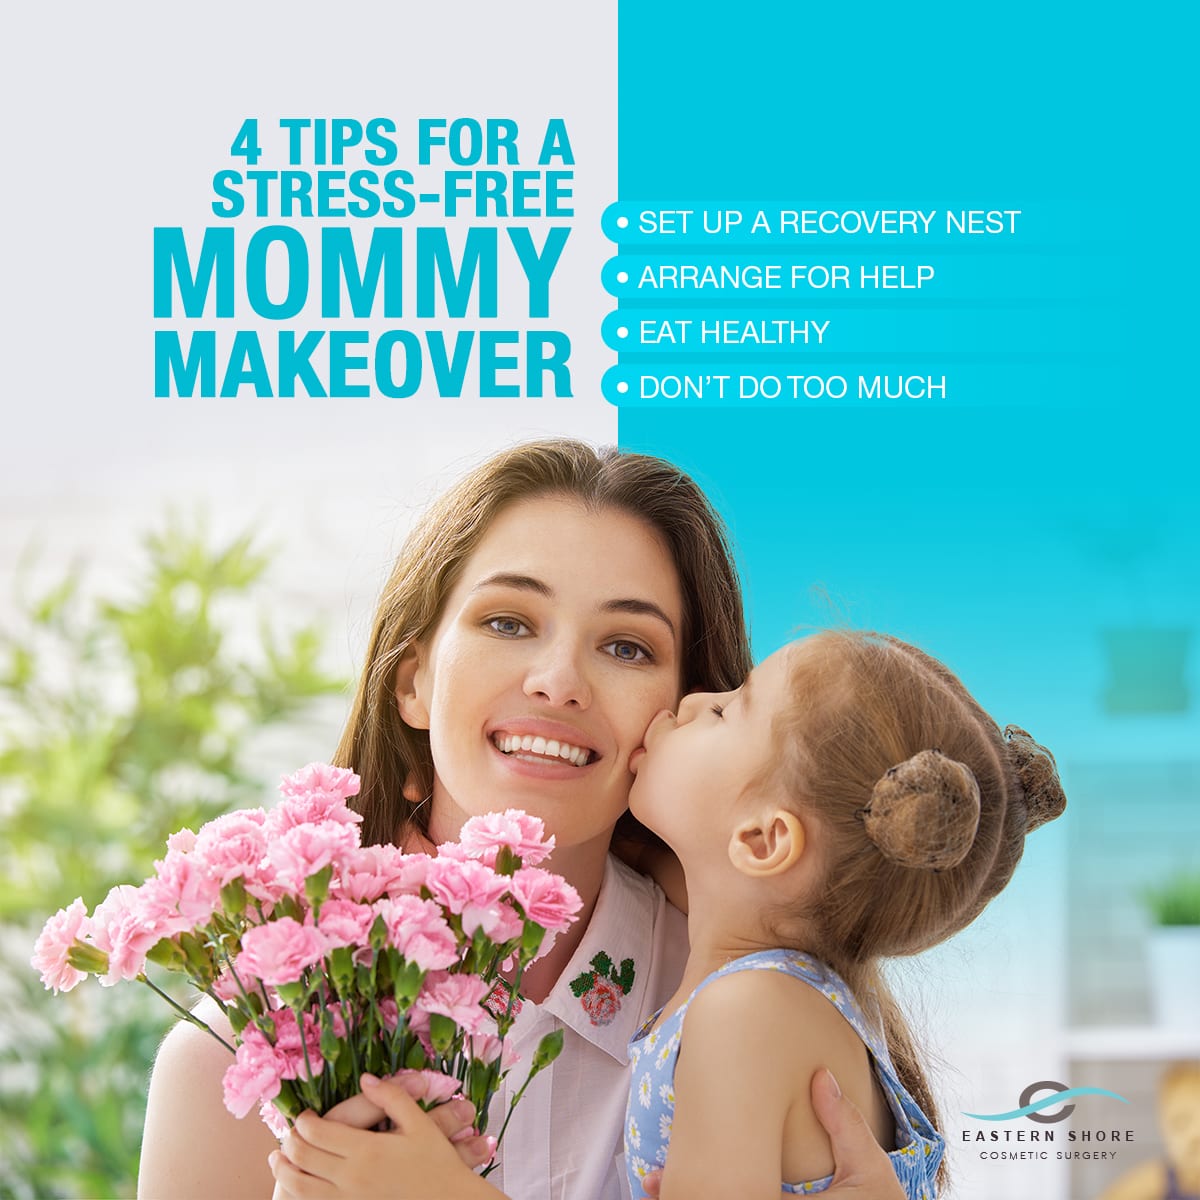 4 Tips For A Stress-Free Mommy Makeover [Infographic] img 1